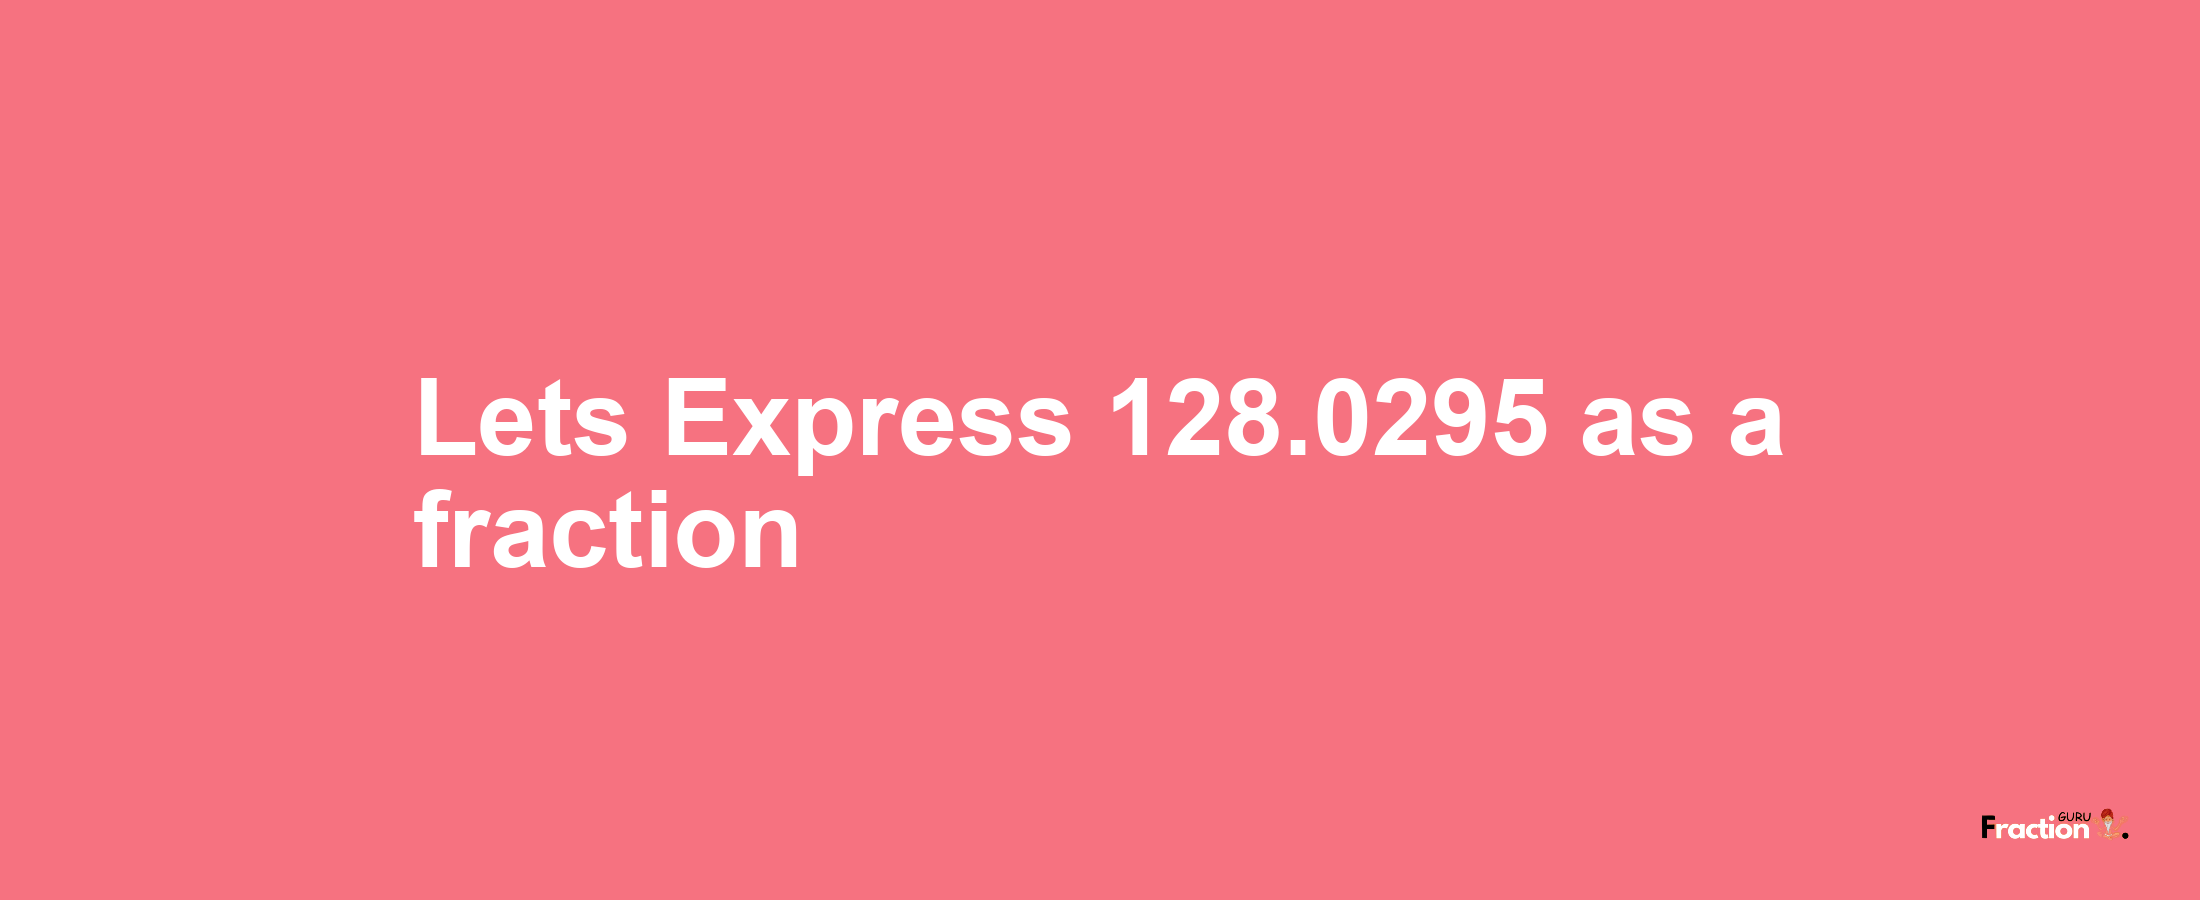 Lets Express 128.0295 as afraction